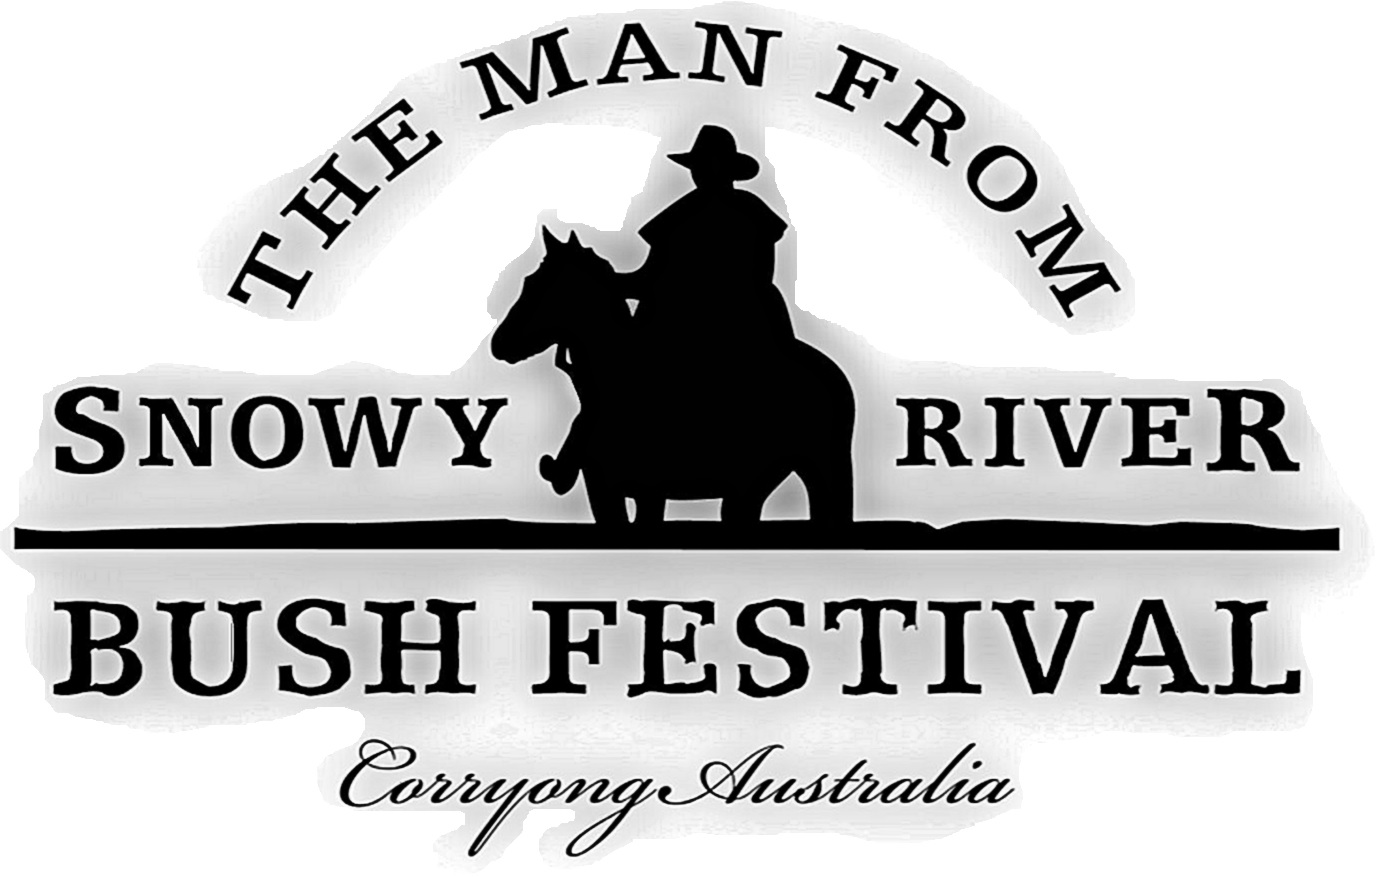 The Man From Snowy River Bush Festival Powered by FestivalPro